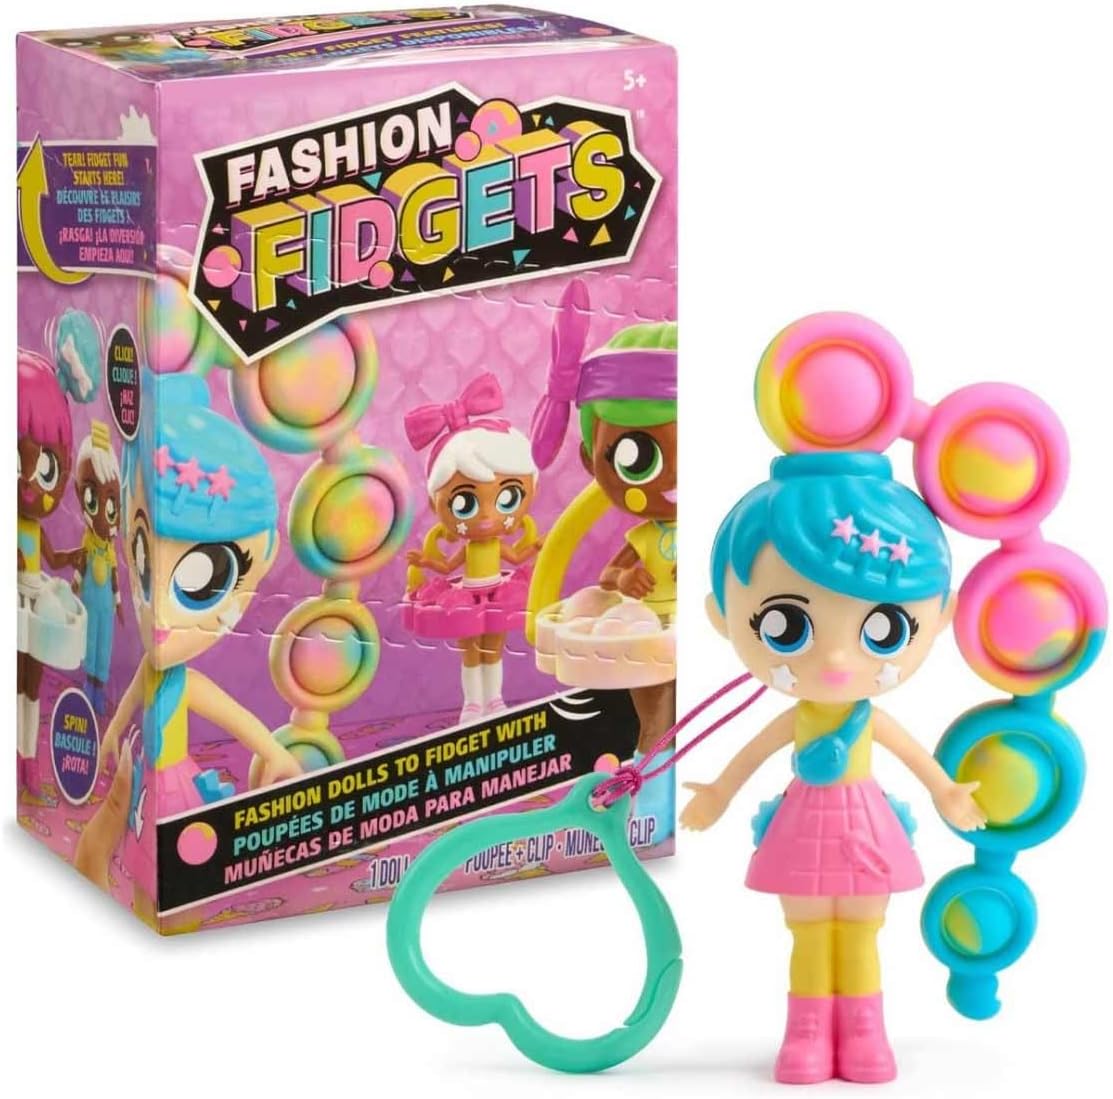 Fashion Fidgets Sensory Toy Dolls – Push Pop Fidget Toy Includes 1 Mystery Doll – Anxiety and Stress Relief for Kids